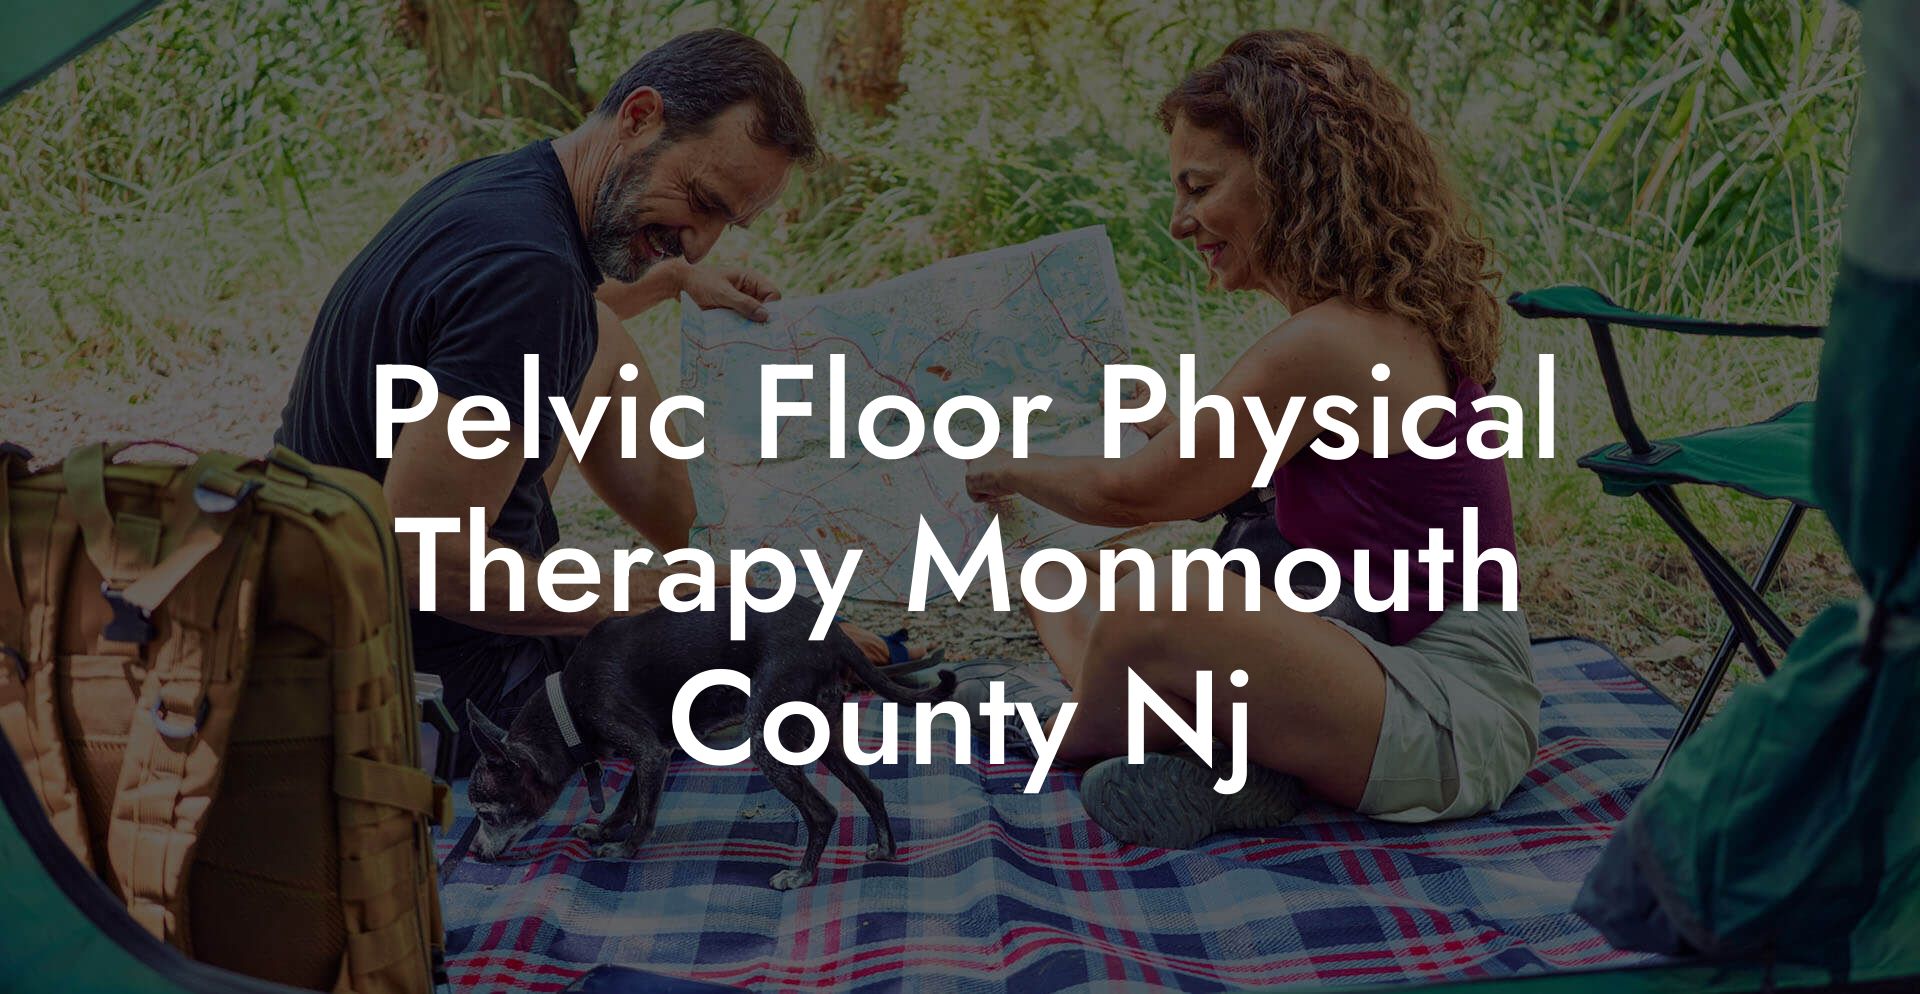 Pelvic Floor Physical Therapy Monmouth County Nj